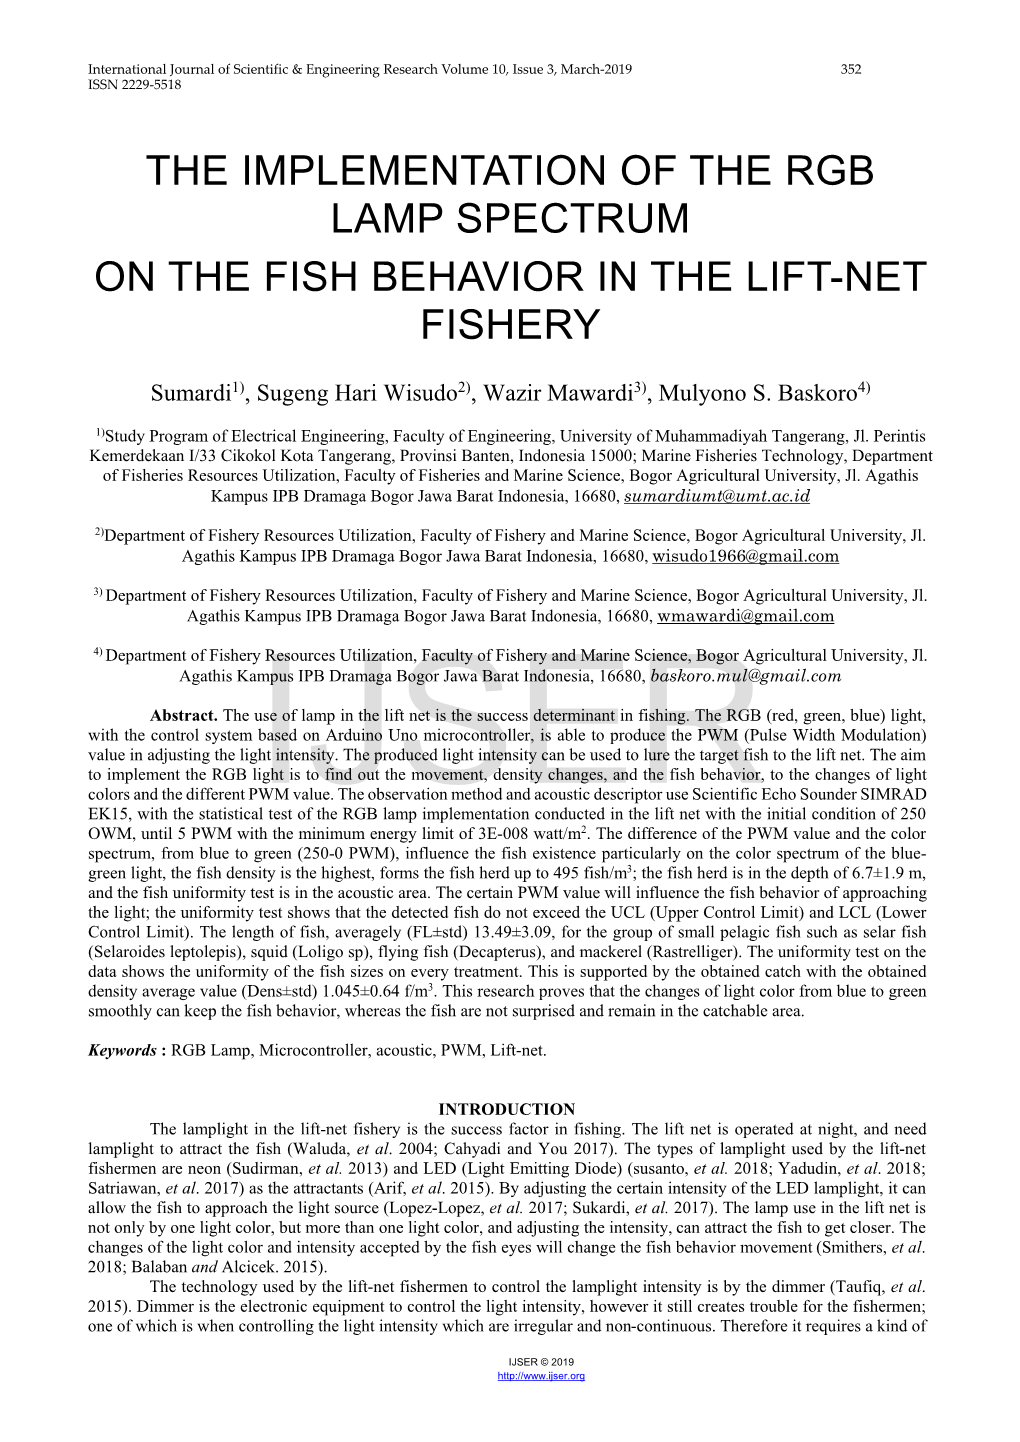 The Implementation of the Rgb Lamp Spectrum on the Fish Behavior in the Lift-Net Fishery